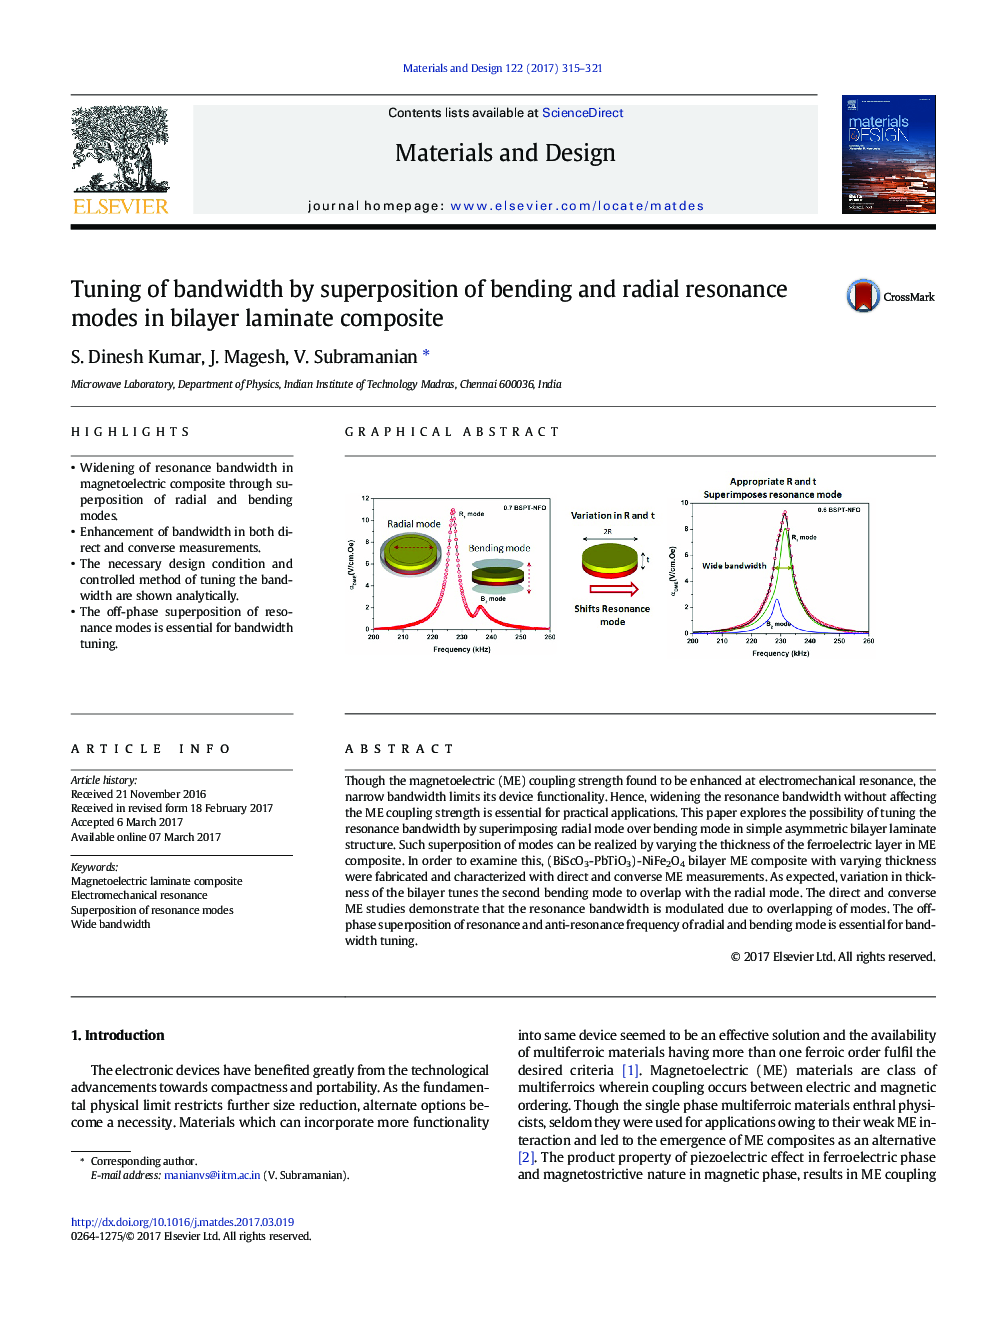 Tuning of bandwidth by superposition of bending and radial resonance modes in bilayer laminate composite